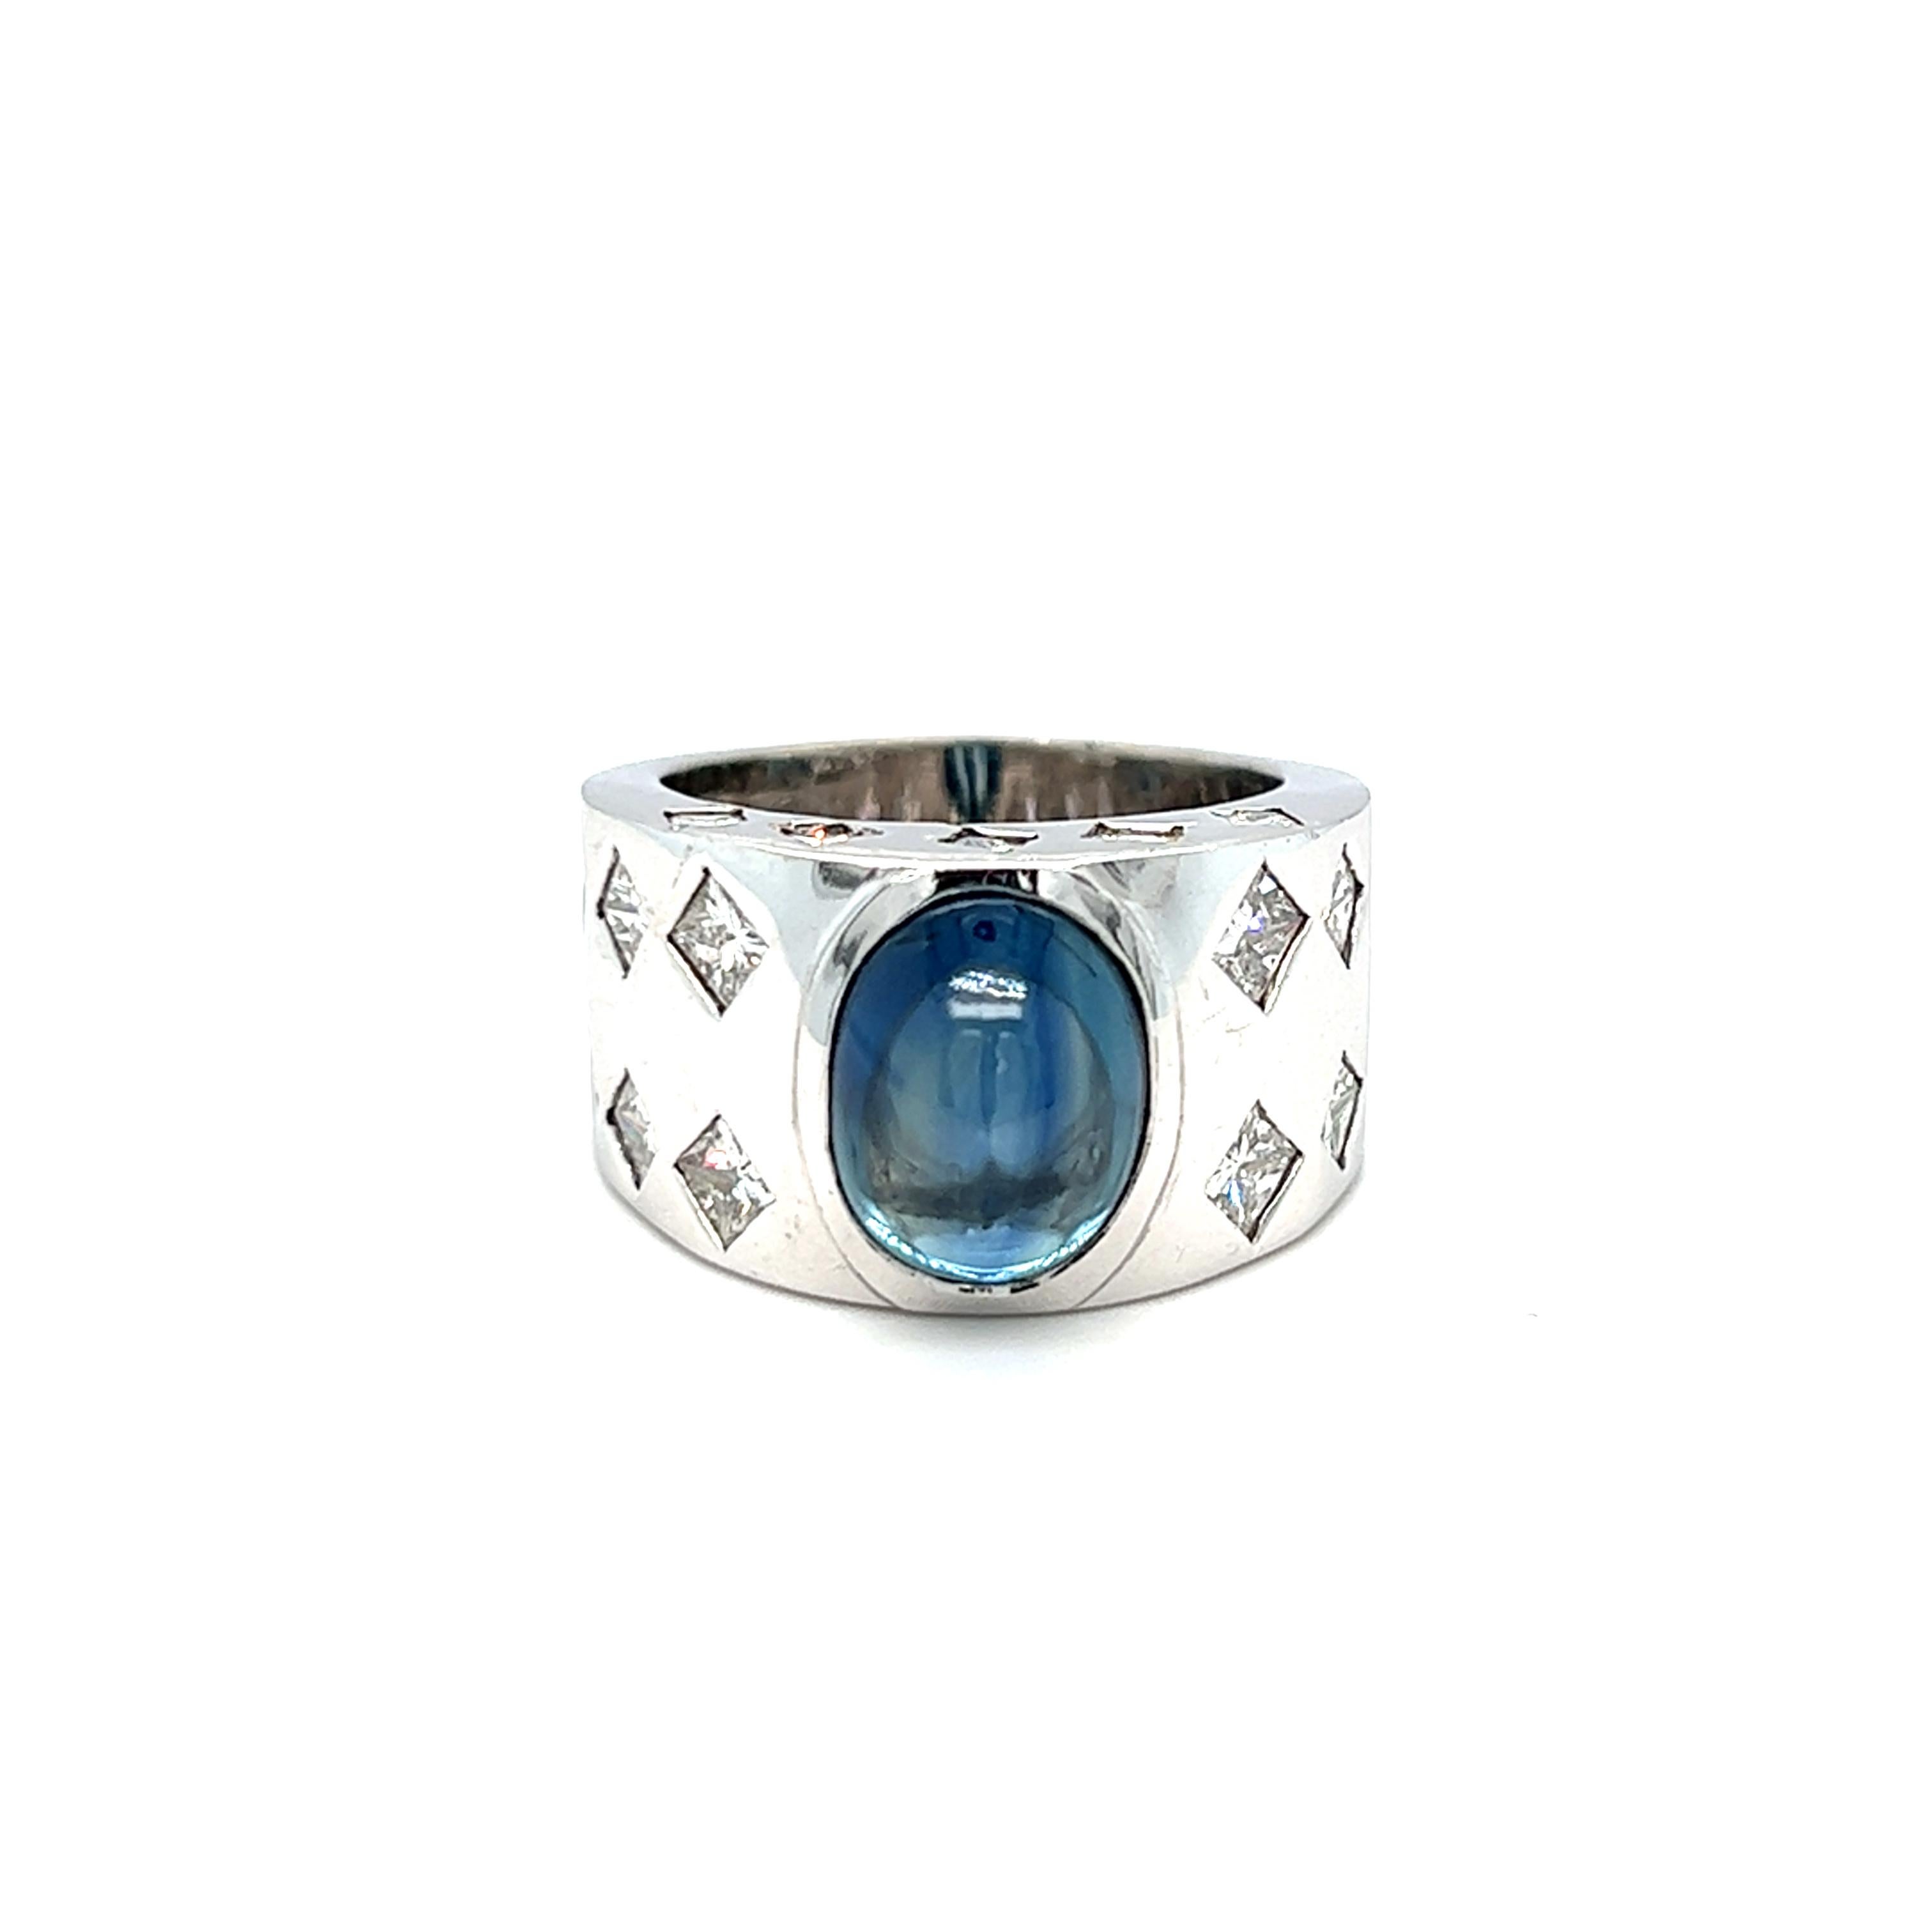 This bold and substantial wide band ring features a GIA certified cabochon sapphire at center. The sapphire measures 11.40 x 9.45 x 7.20 mm and weighs approximately 9 carats. Twenty two square colorless diamond beautifully accent the ring at